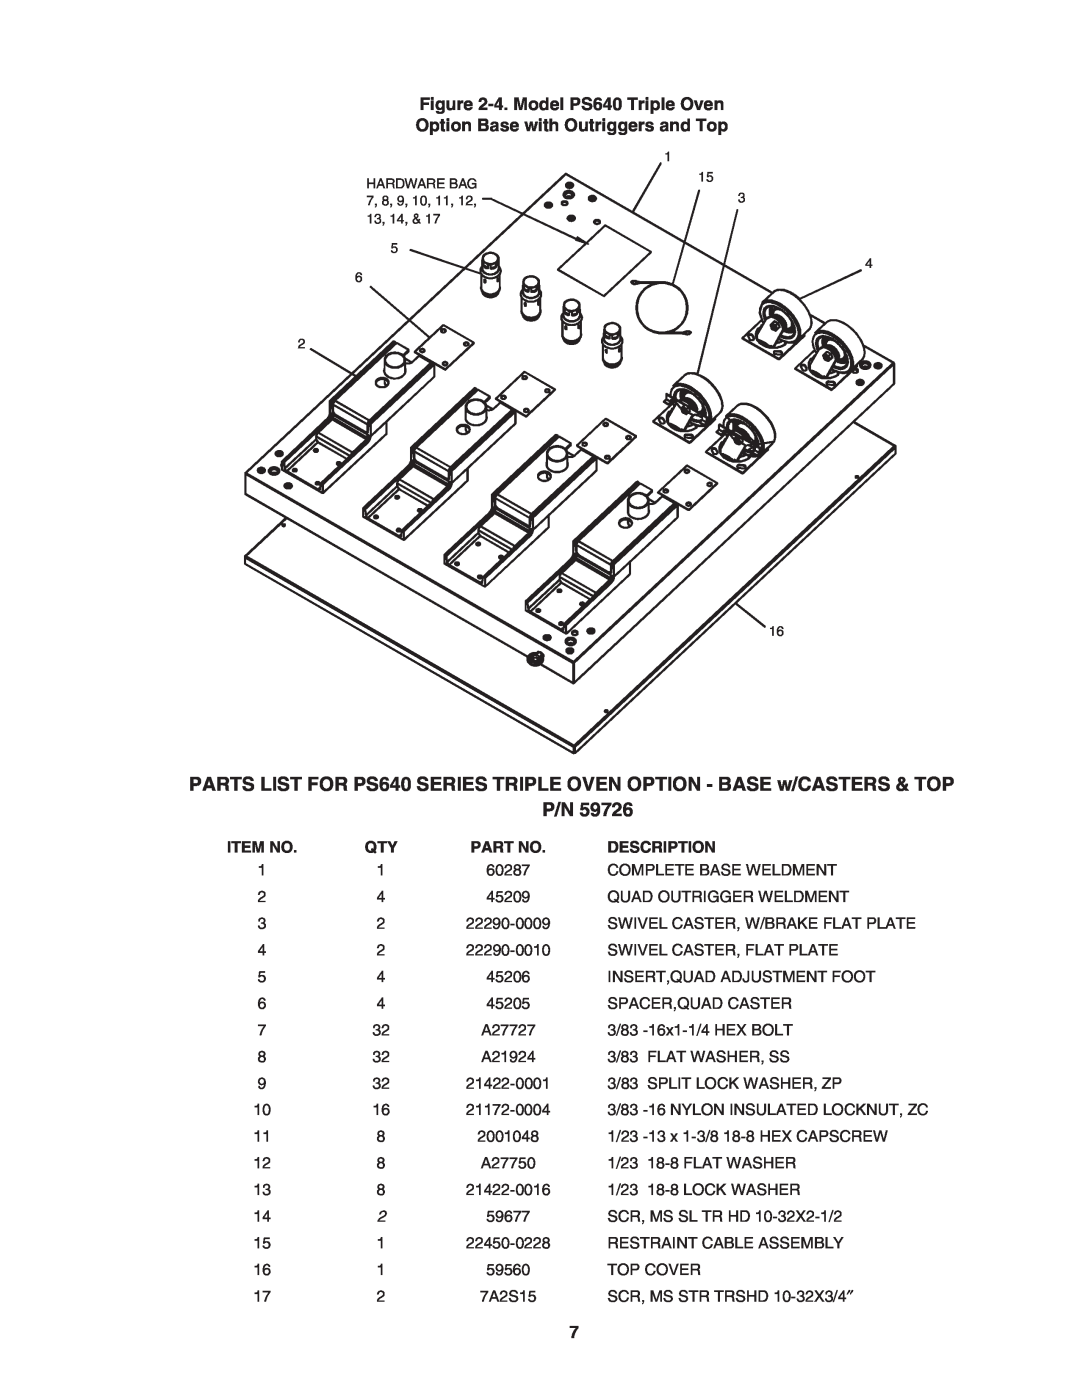 Middleby Marshall PS640E installation manual Item No, Description, Complete Base Weldment 